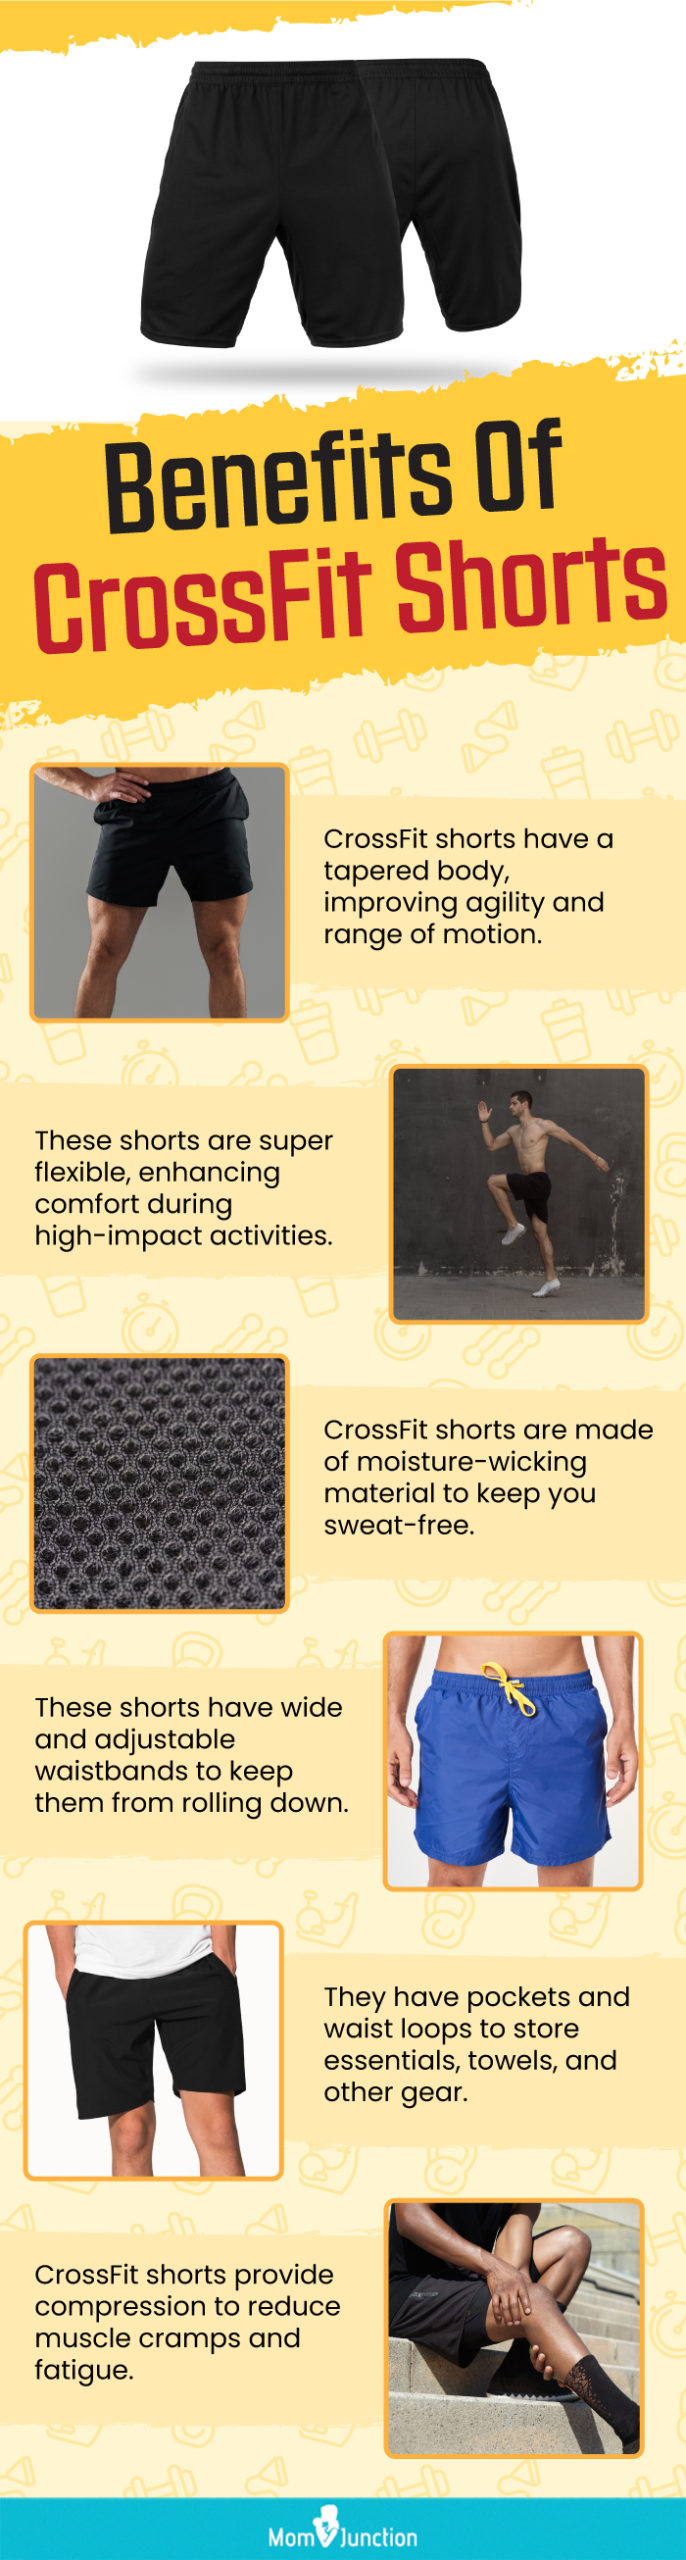 Benefits Of CrossFit Shorts (infographic)